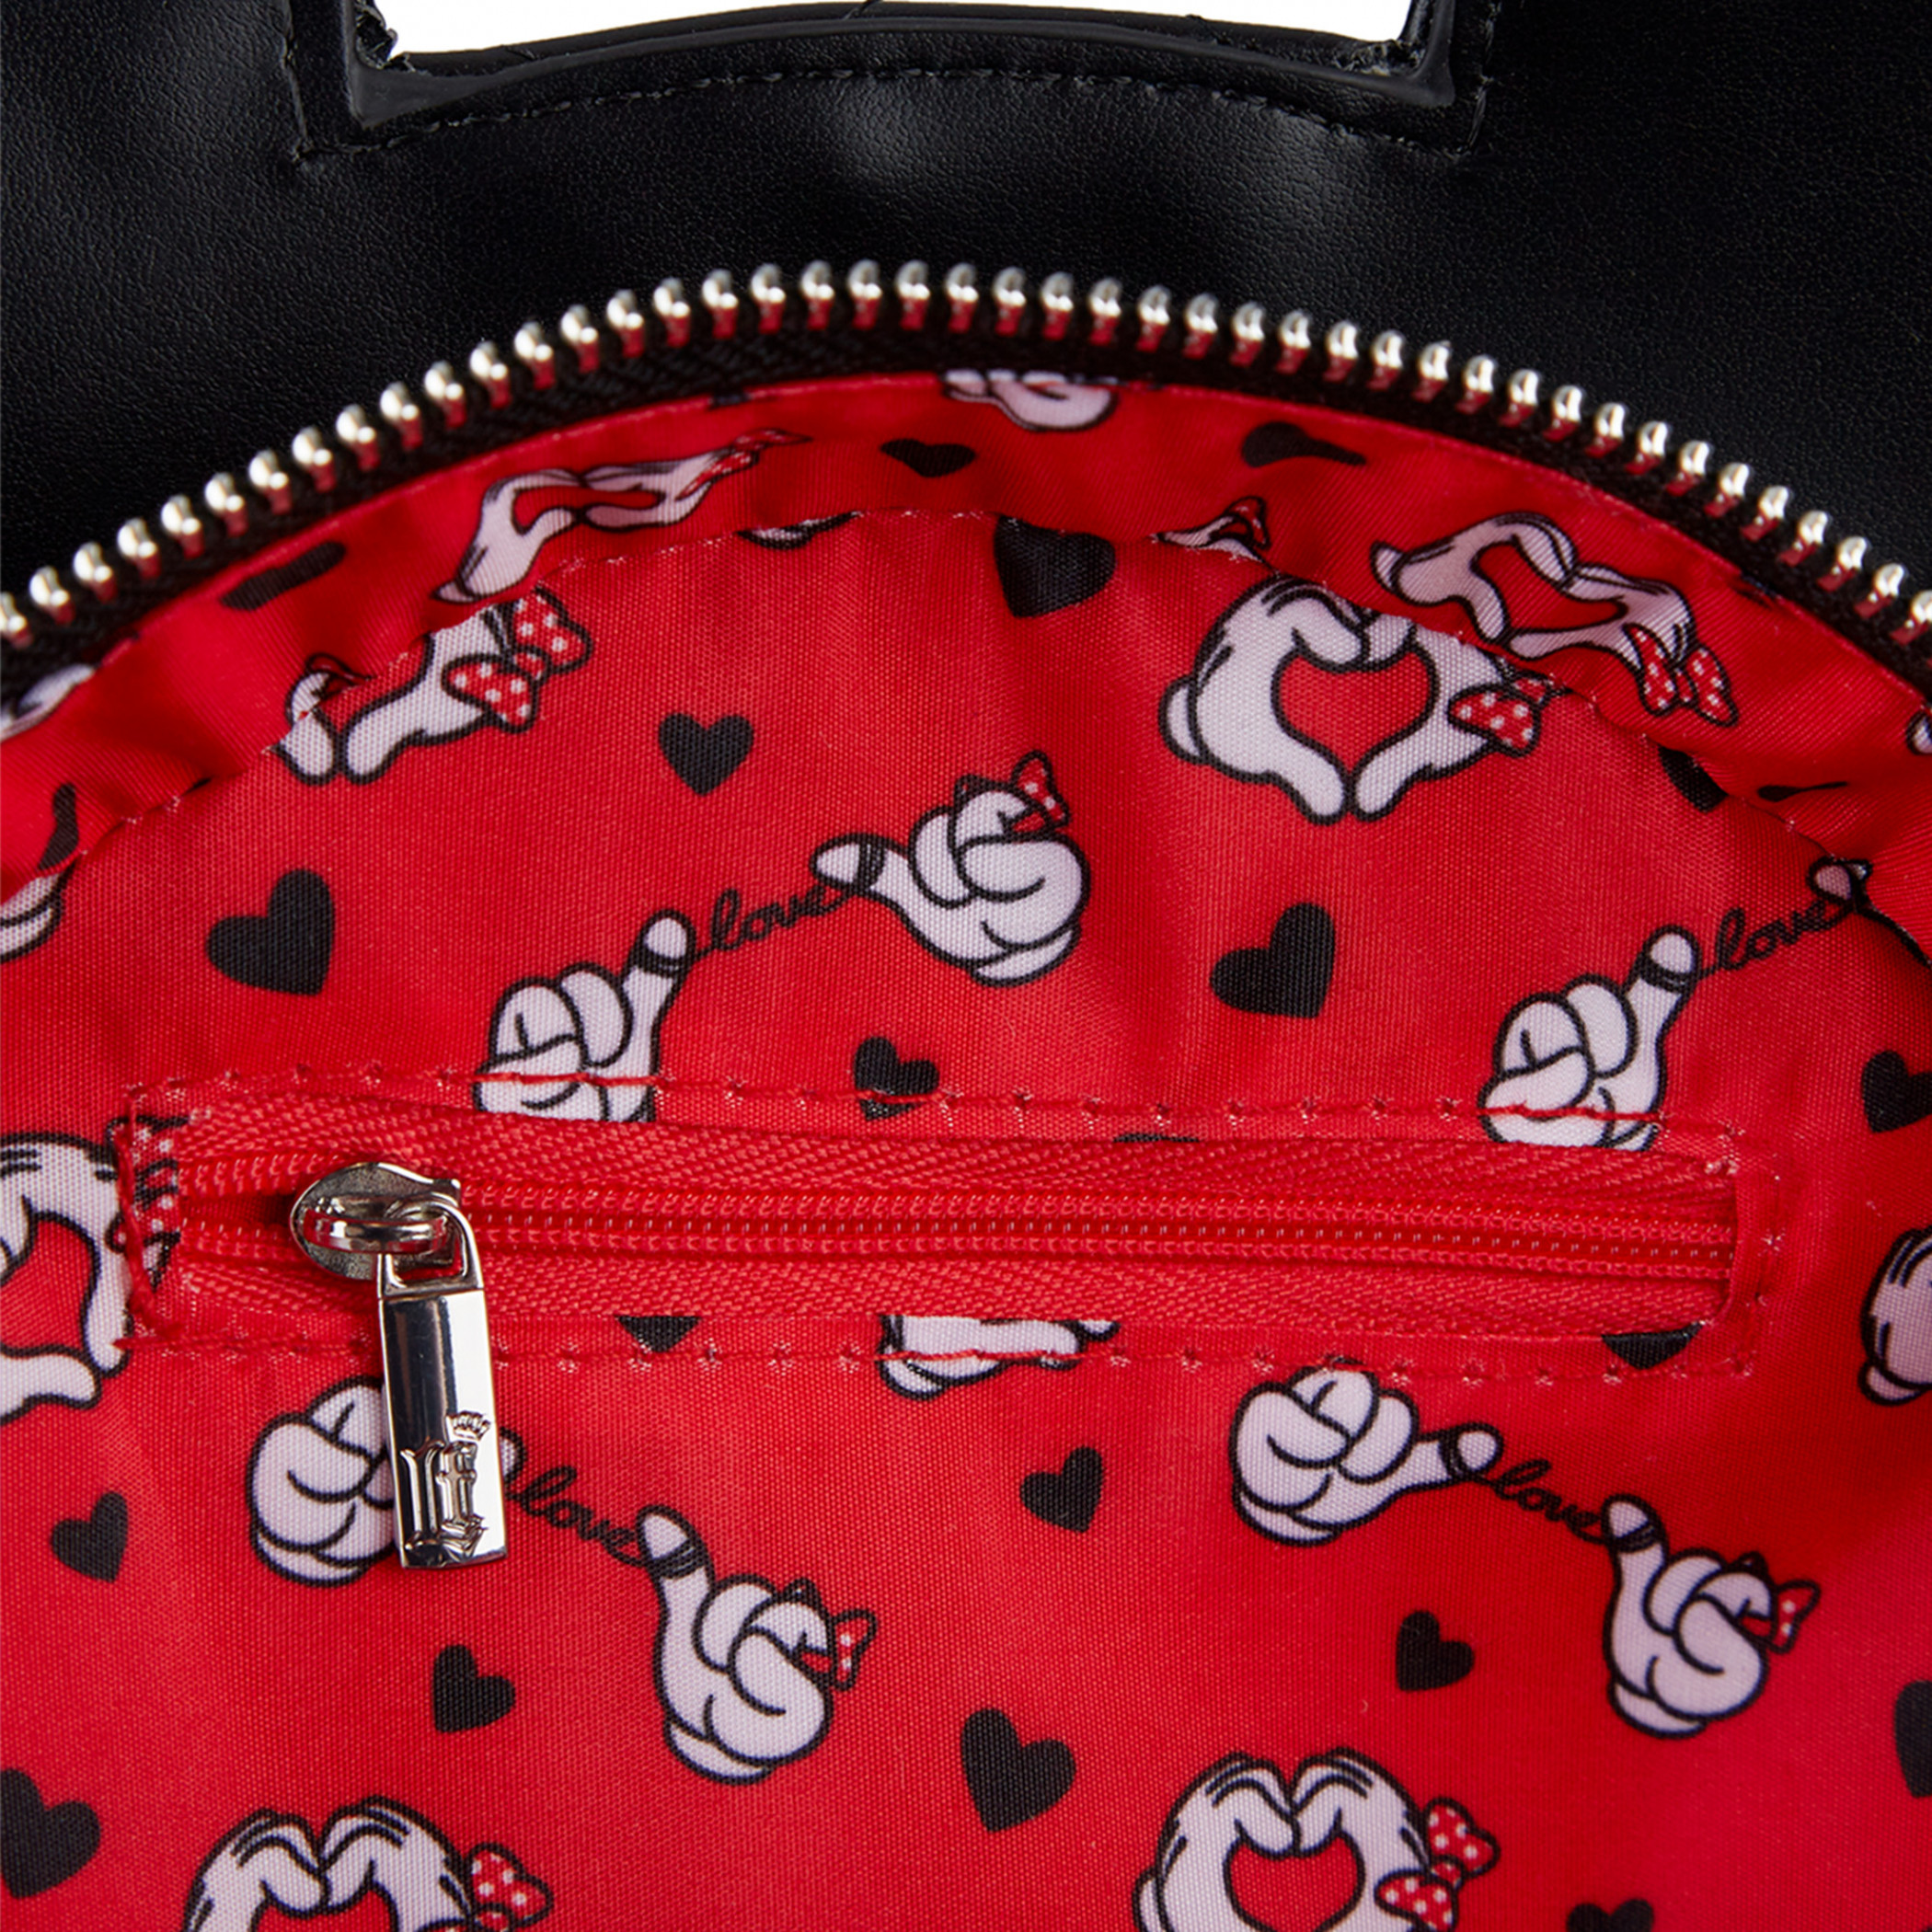 Disney Minnie Mouse Valentine's Reversible Crossbody Bag by Loungefly